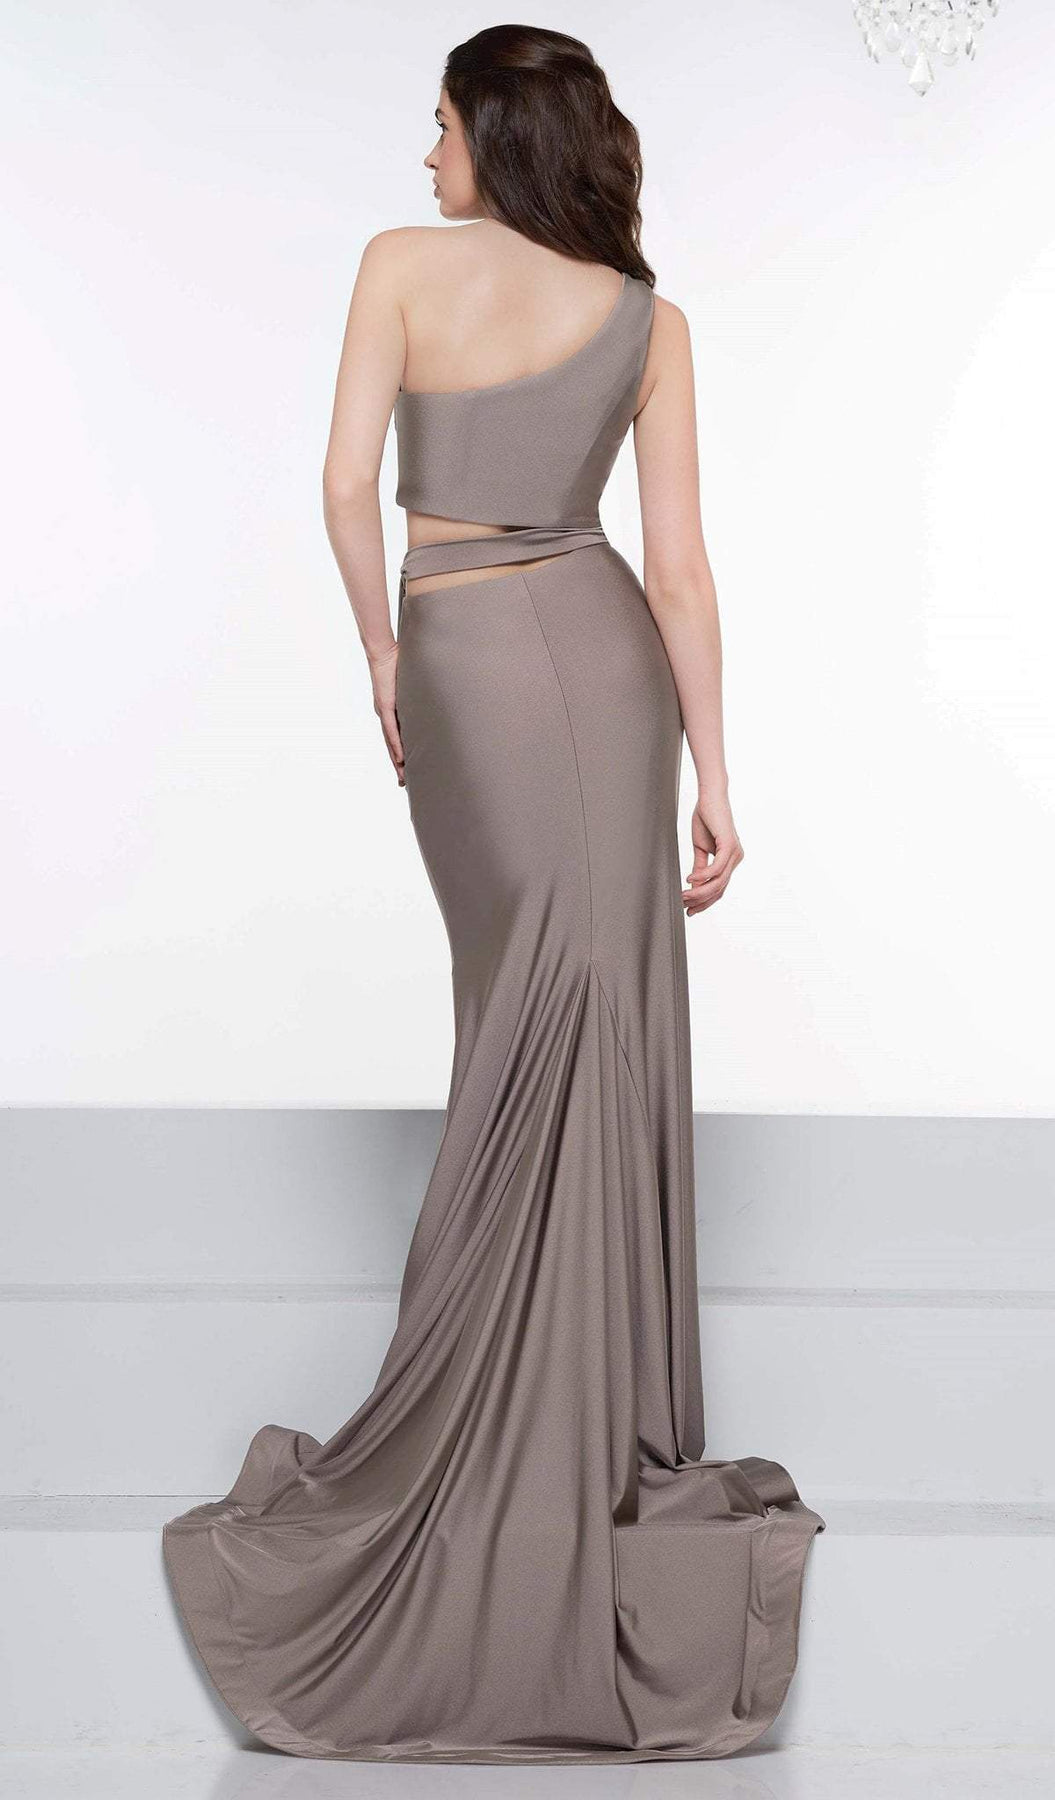 Colors Dress - 2137 Asymmetrical Exposed Midriff High Slit Gown In Brown and Gray